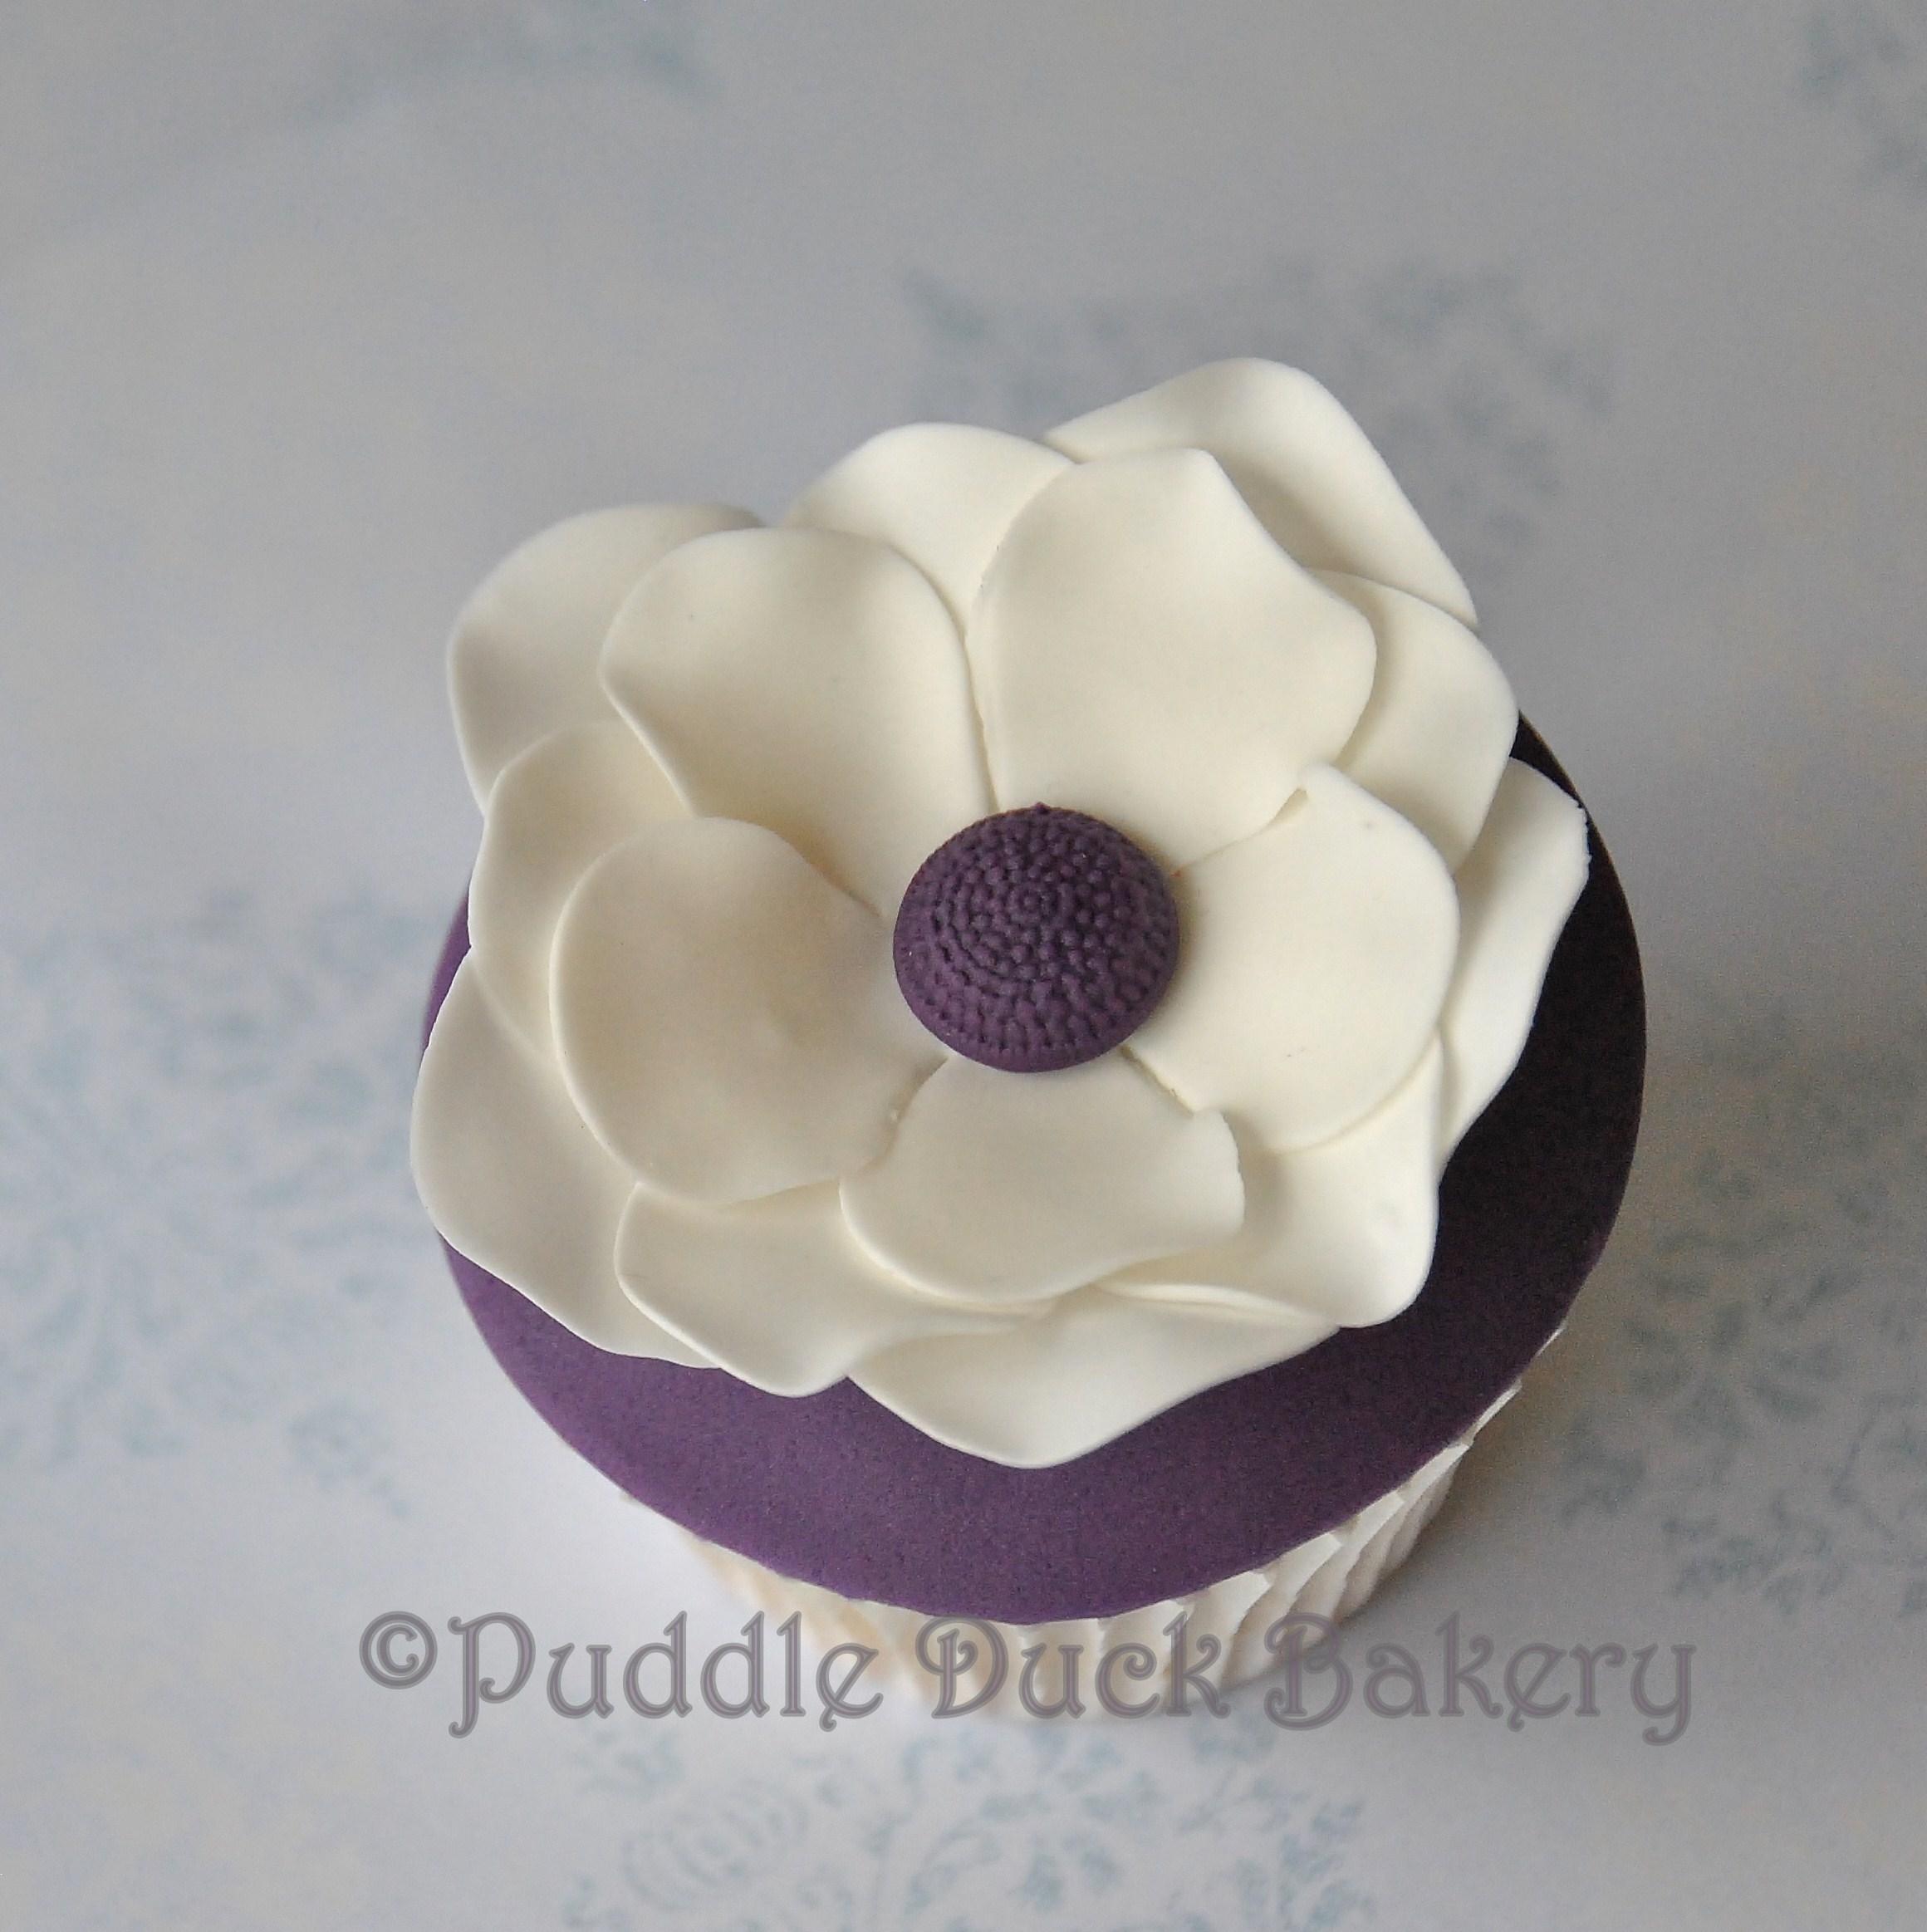 A beautiful flower with delicate petals on a cupcake.